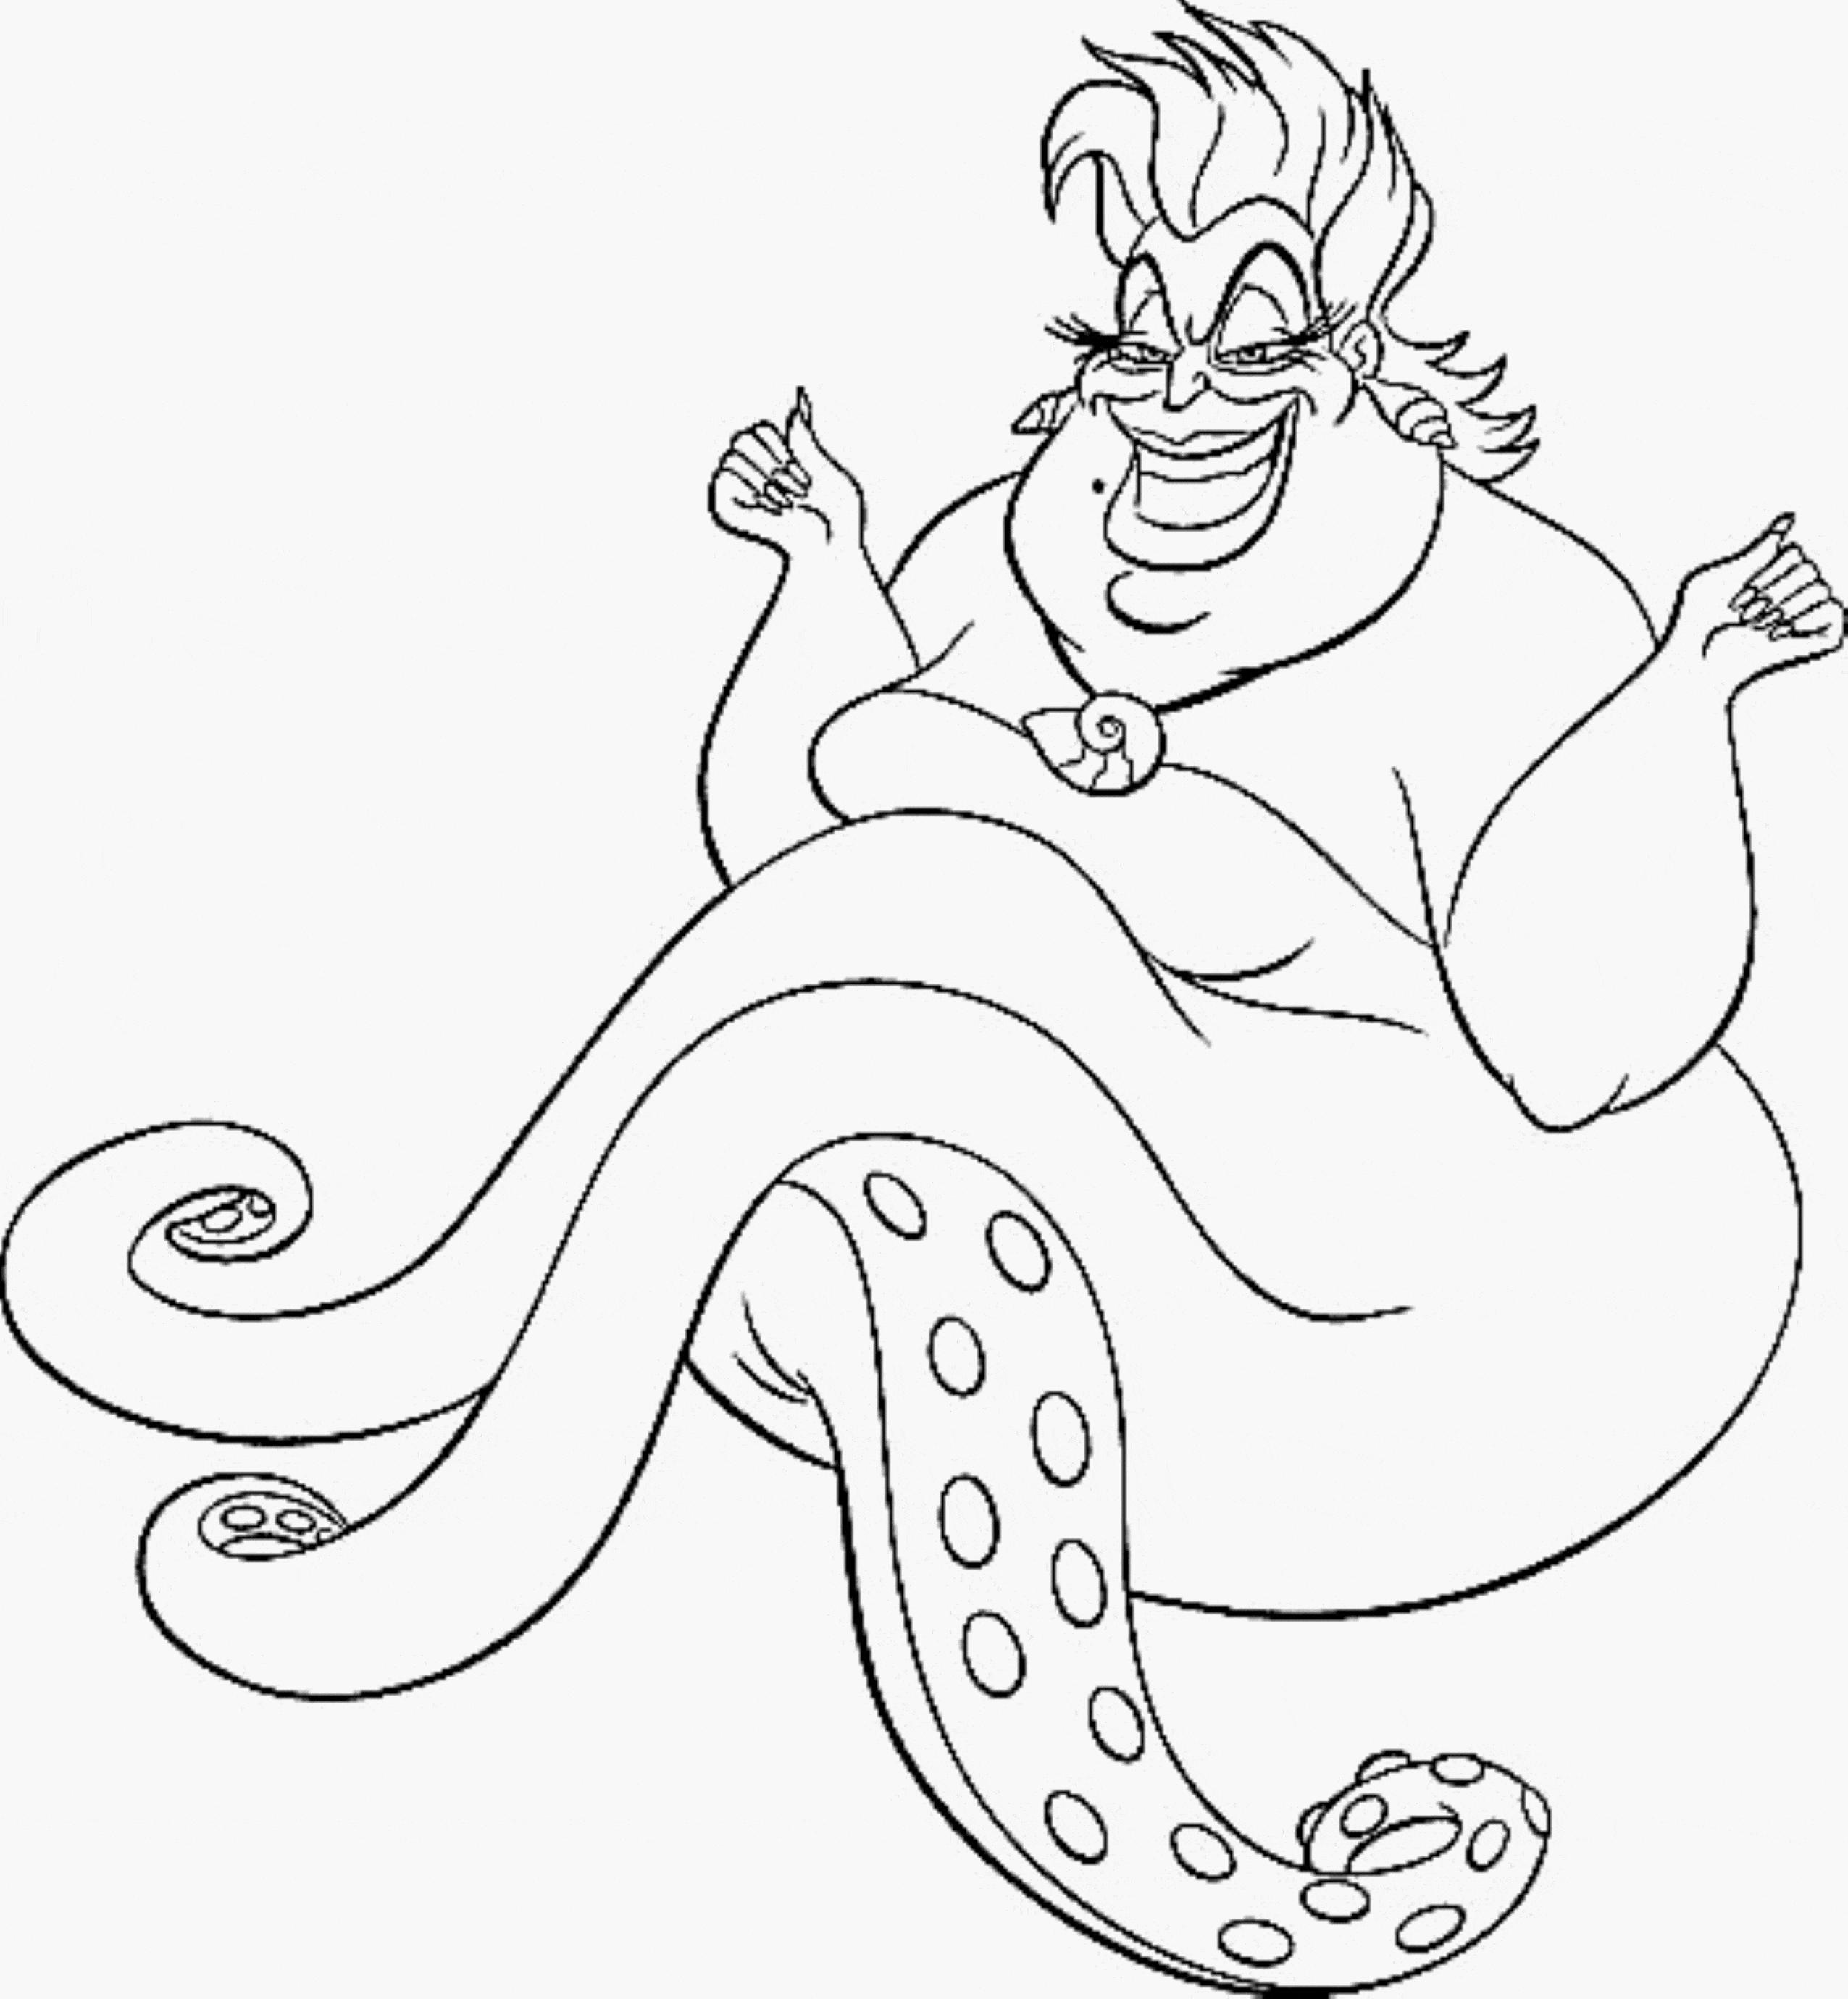 mermaid coloring page print download find the suitable little mermaid coloring page mermaid 